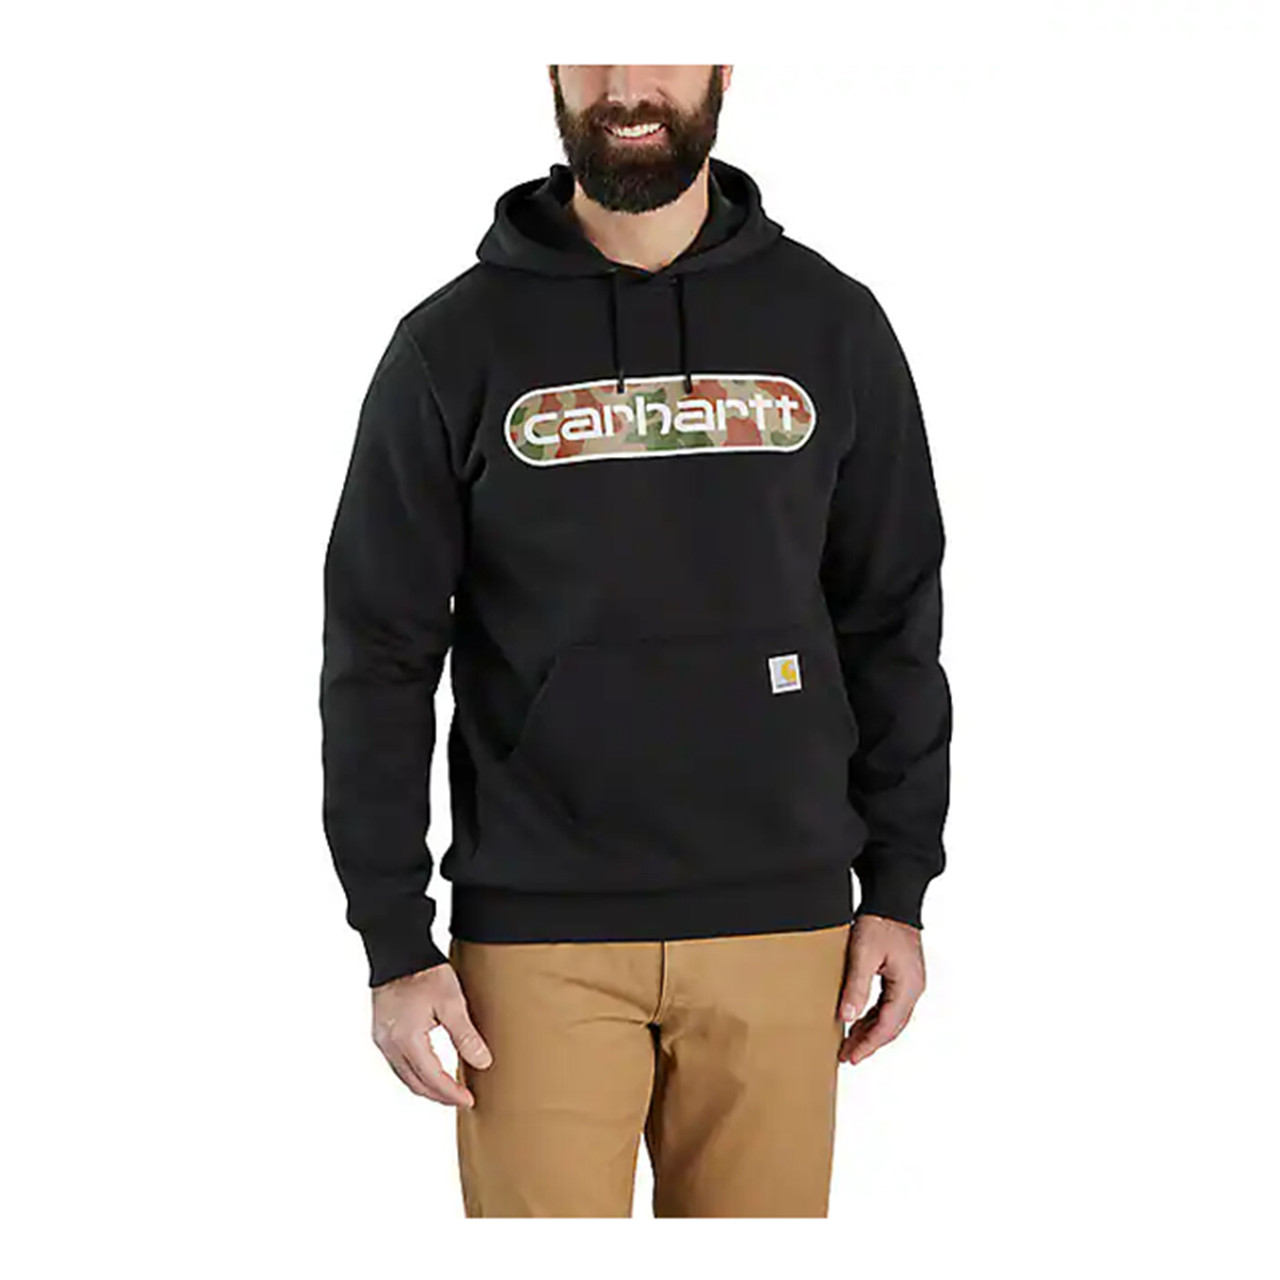 Carhartt Loose Fitting Midweight Camo Logo Graphic Hoodie